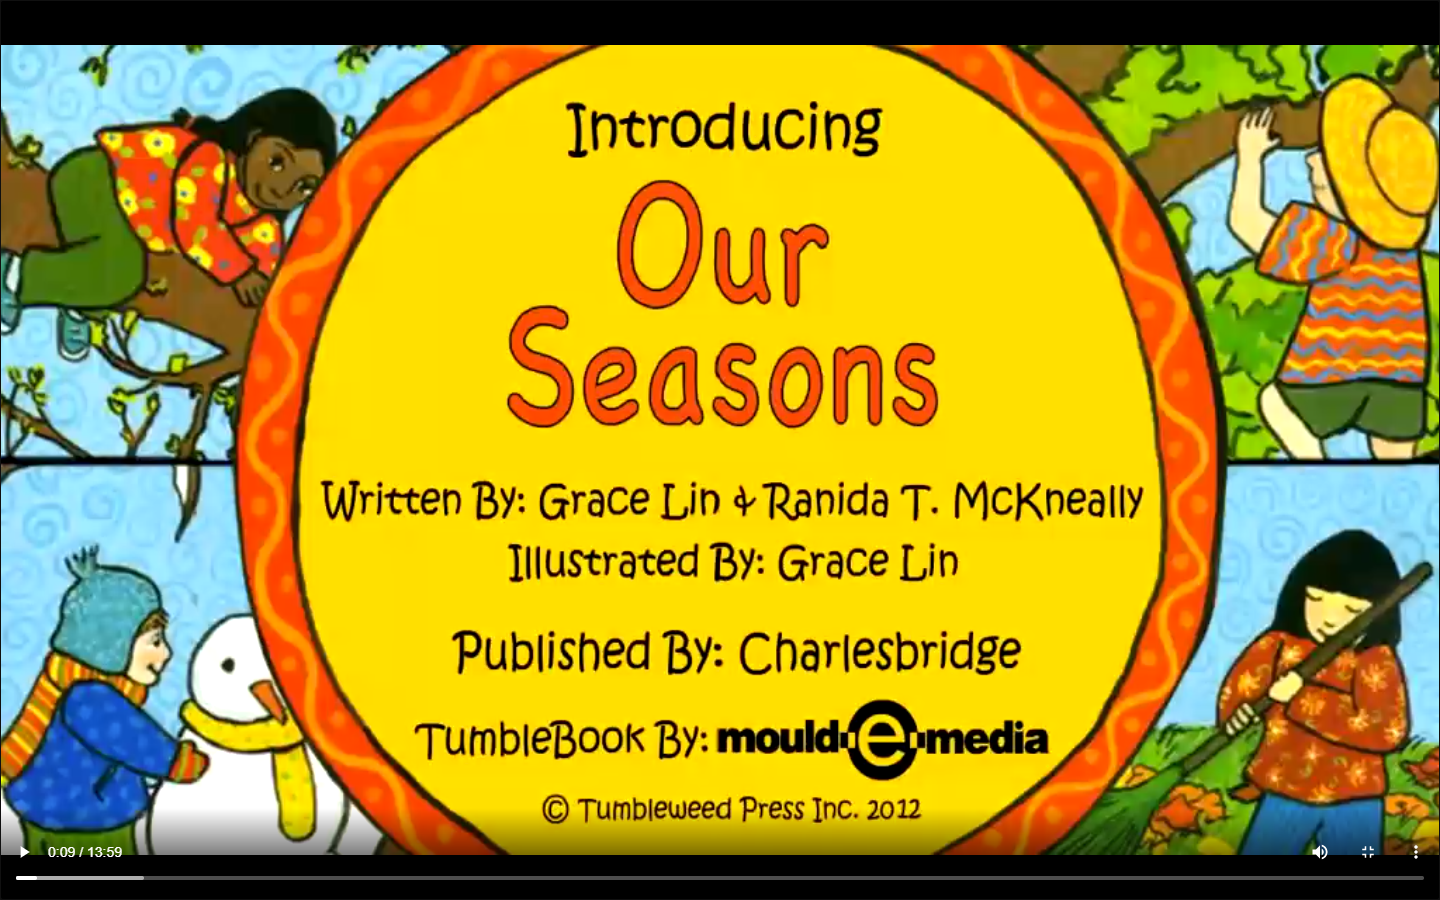 Introducing Our Seasons